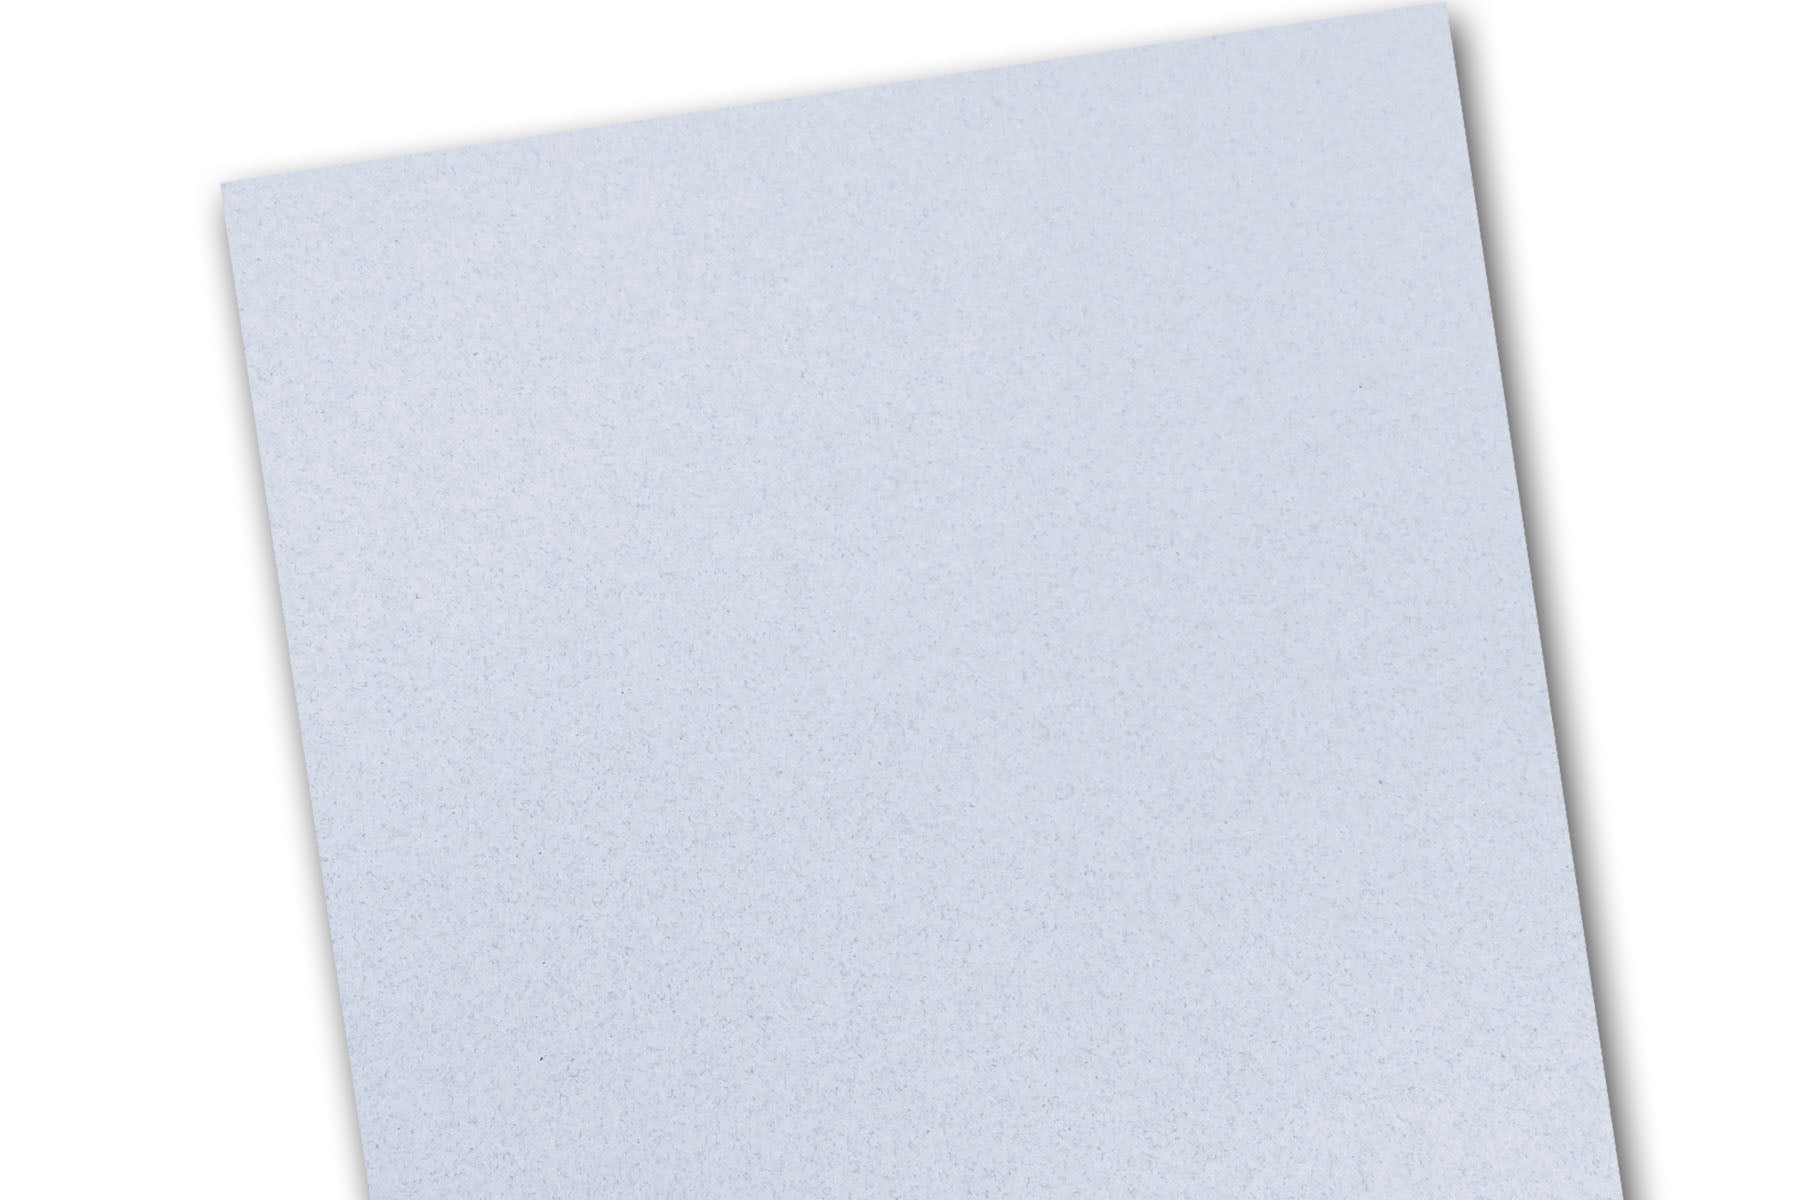 Blue White Card Stock - 8 1/2 x 11 in 80 lb Cover Satin 30% Recycled